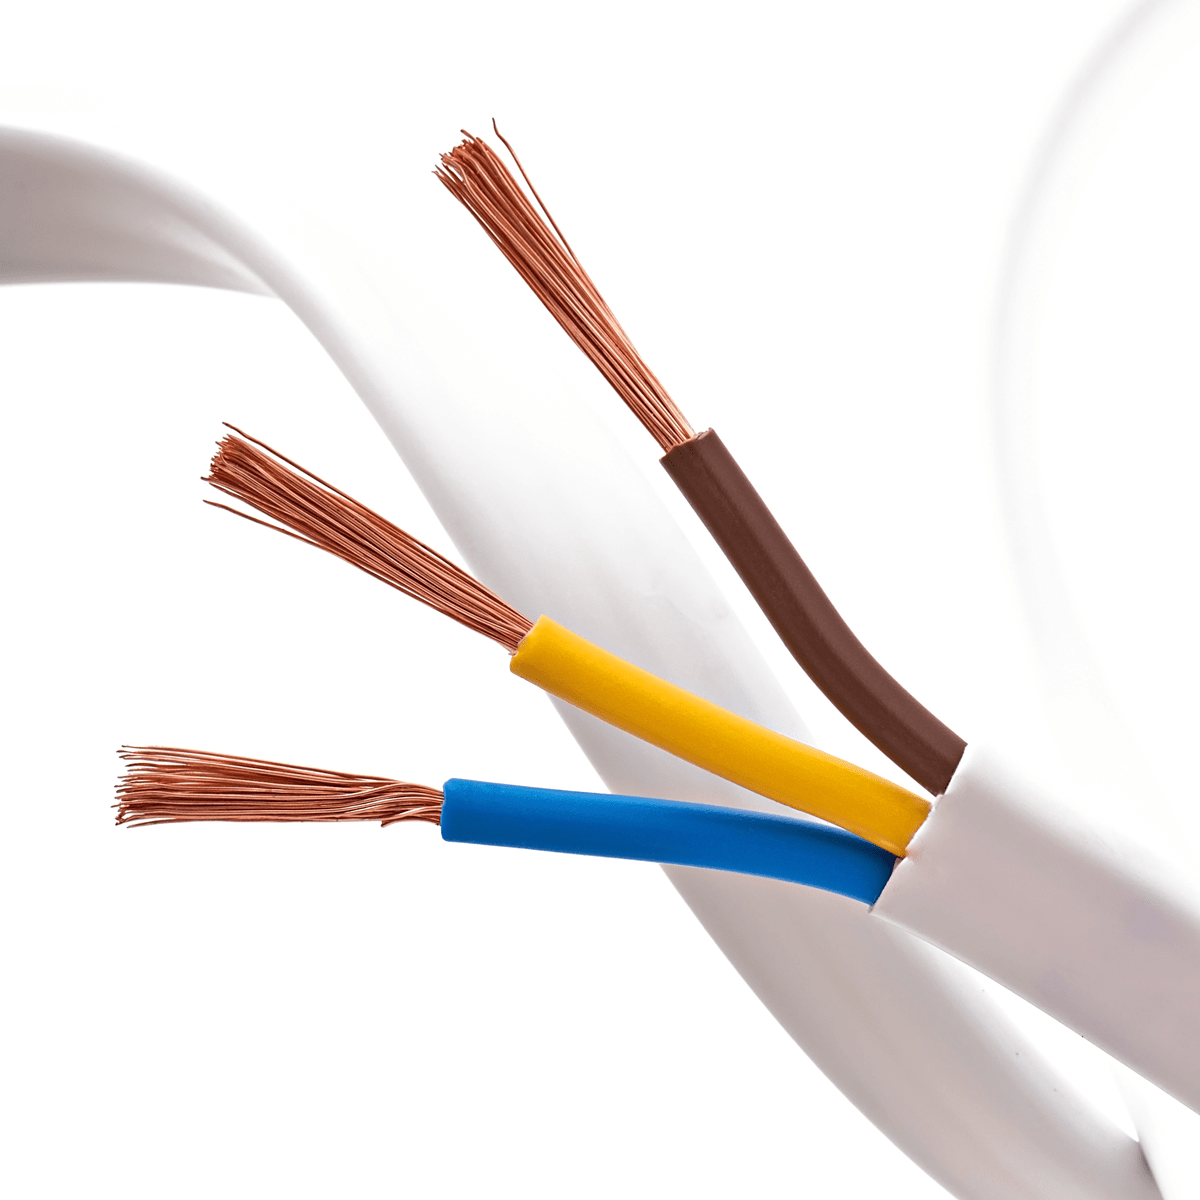 Indoor telecommunication cables